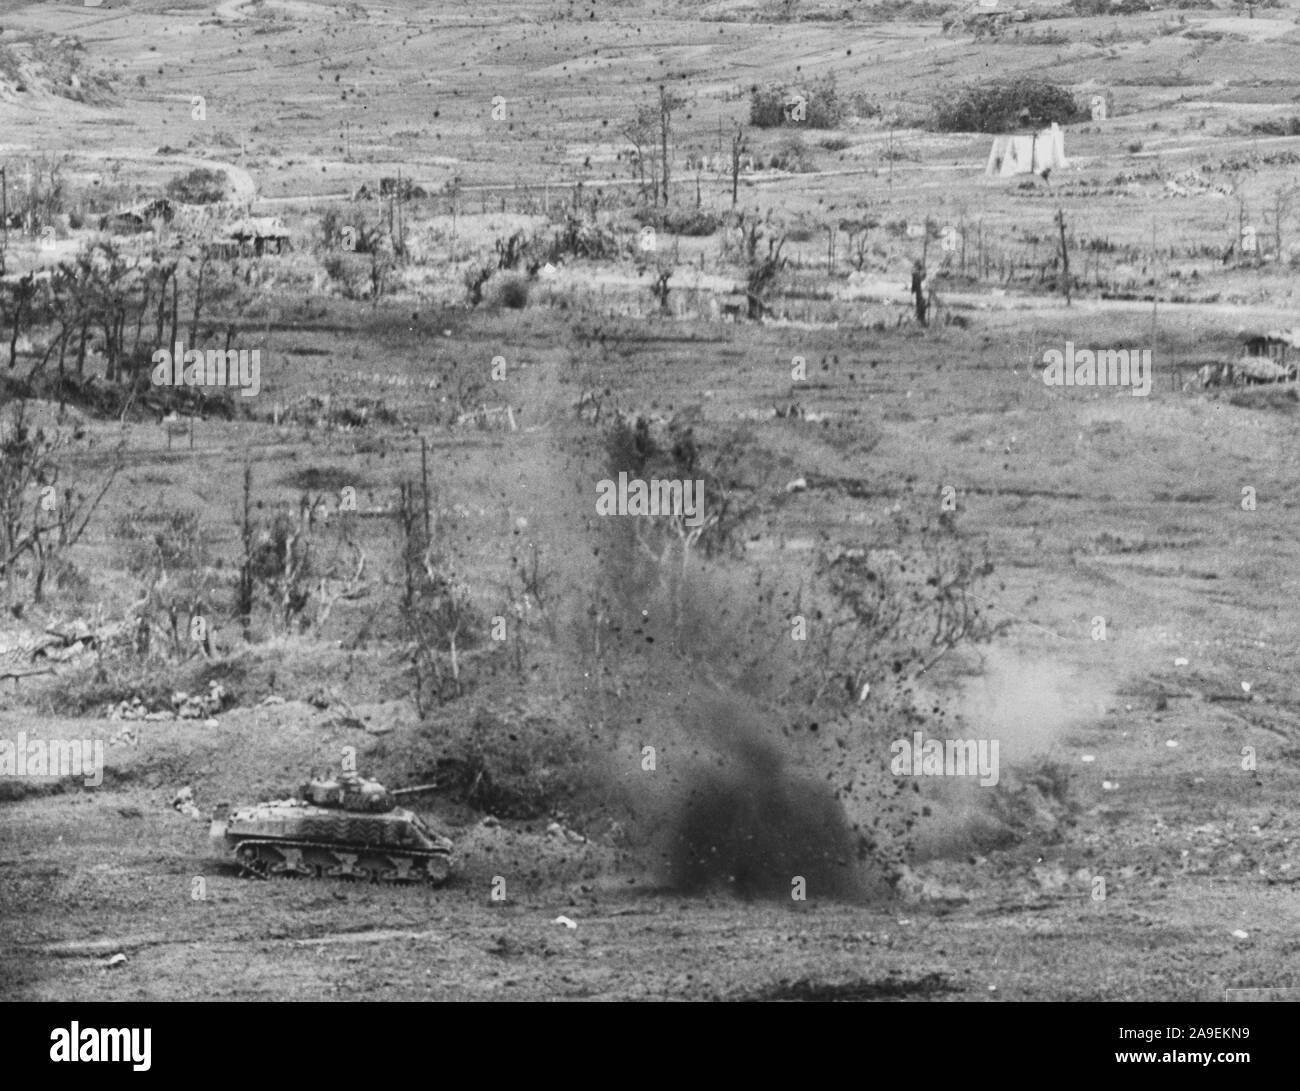 During the atack on Naha, capital of Okinawa, tanks of the sixth marine division draw enemy fire Stock Photo